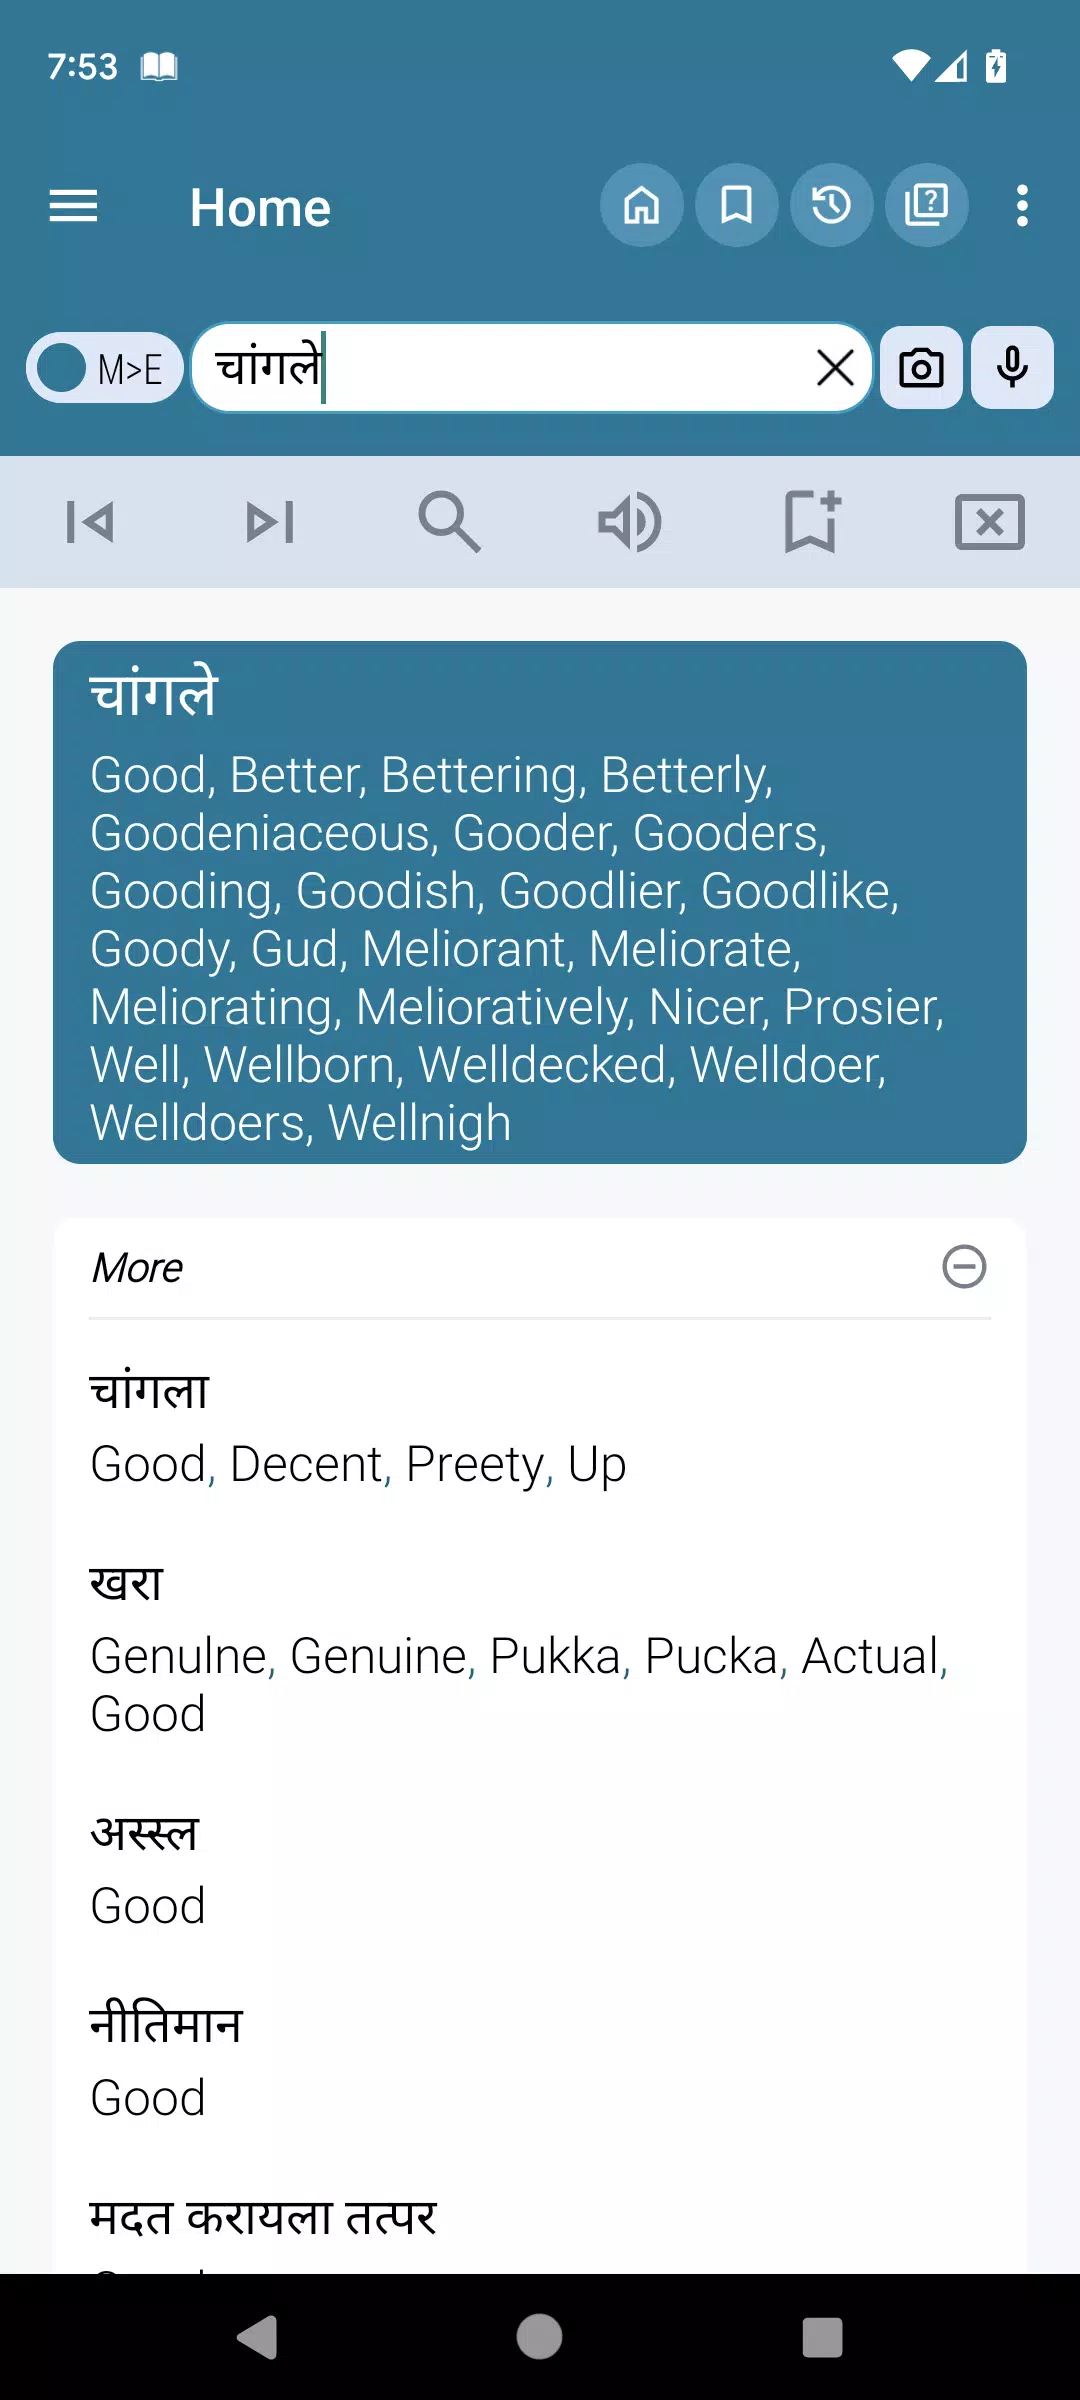 Marathi Dictionary + on the App Store